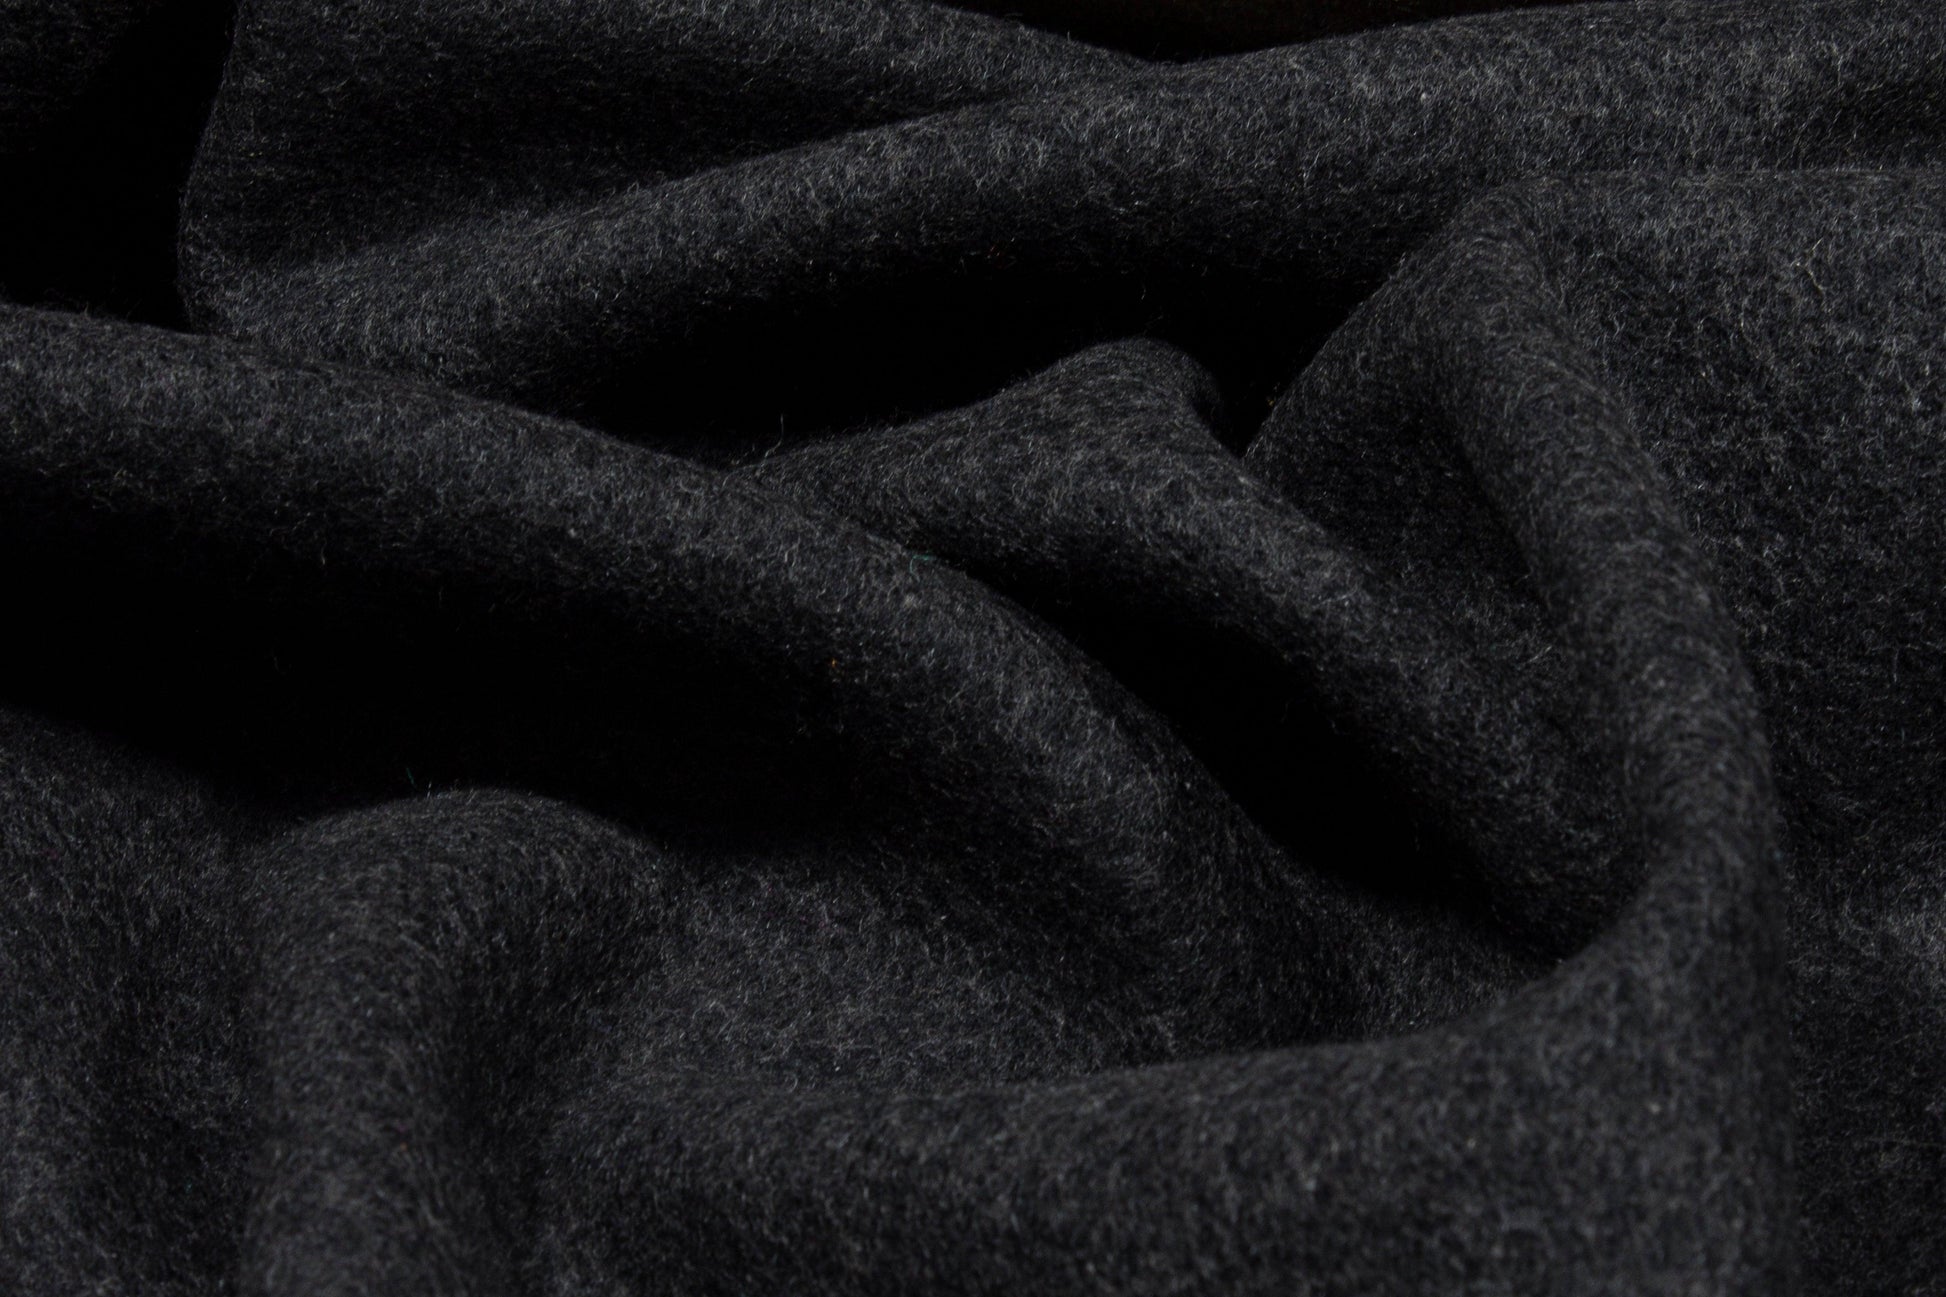 Double Faced Wool Coating - Khaki and Charcoal - Prime Fabrics